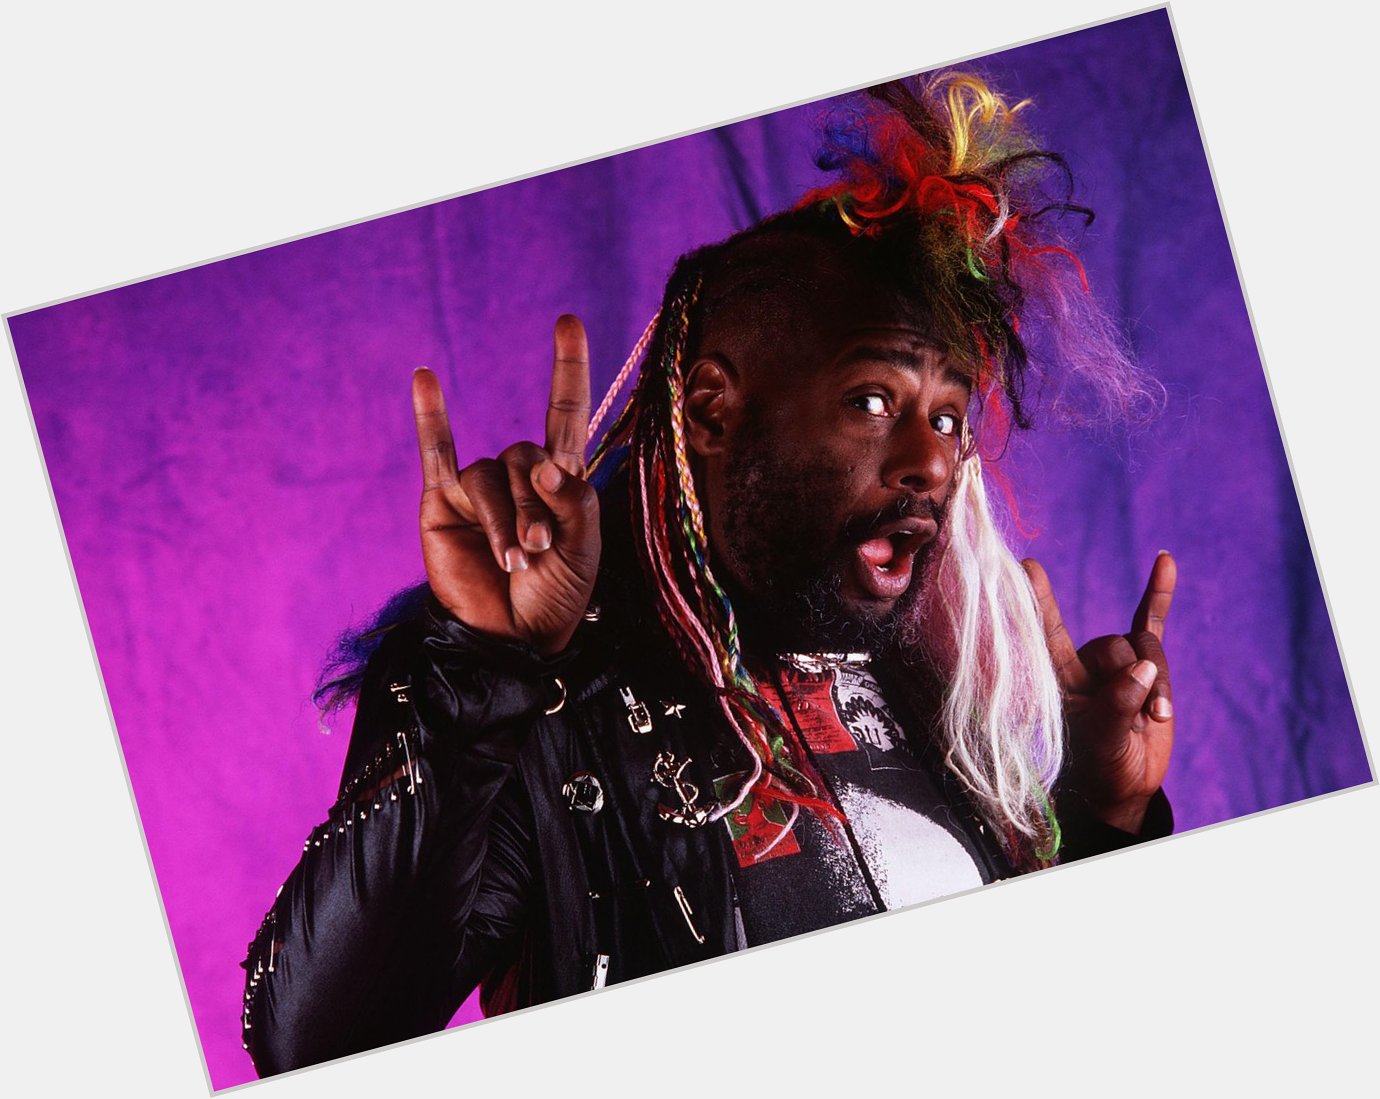 Happy Birthday George Clinton (July 22, 1941)
The father of Funkadelic/Parliament turns 74 years old today. 